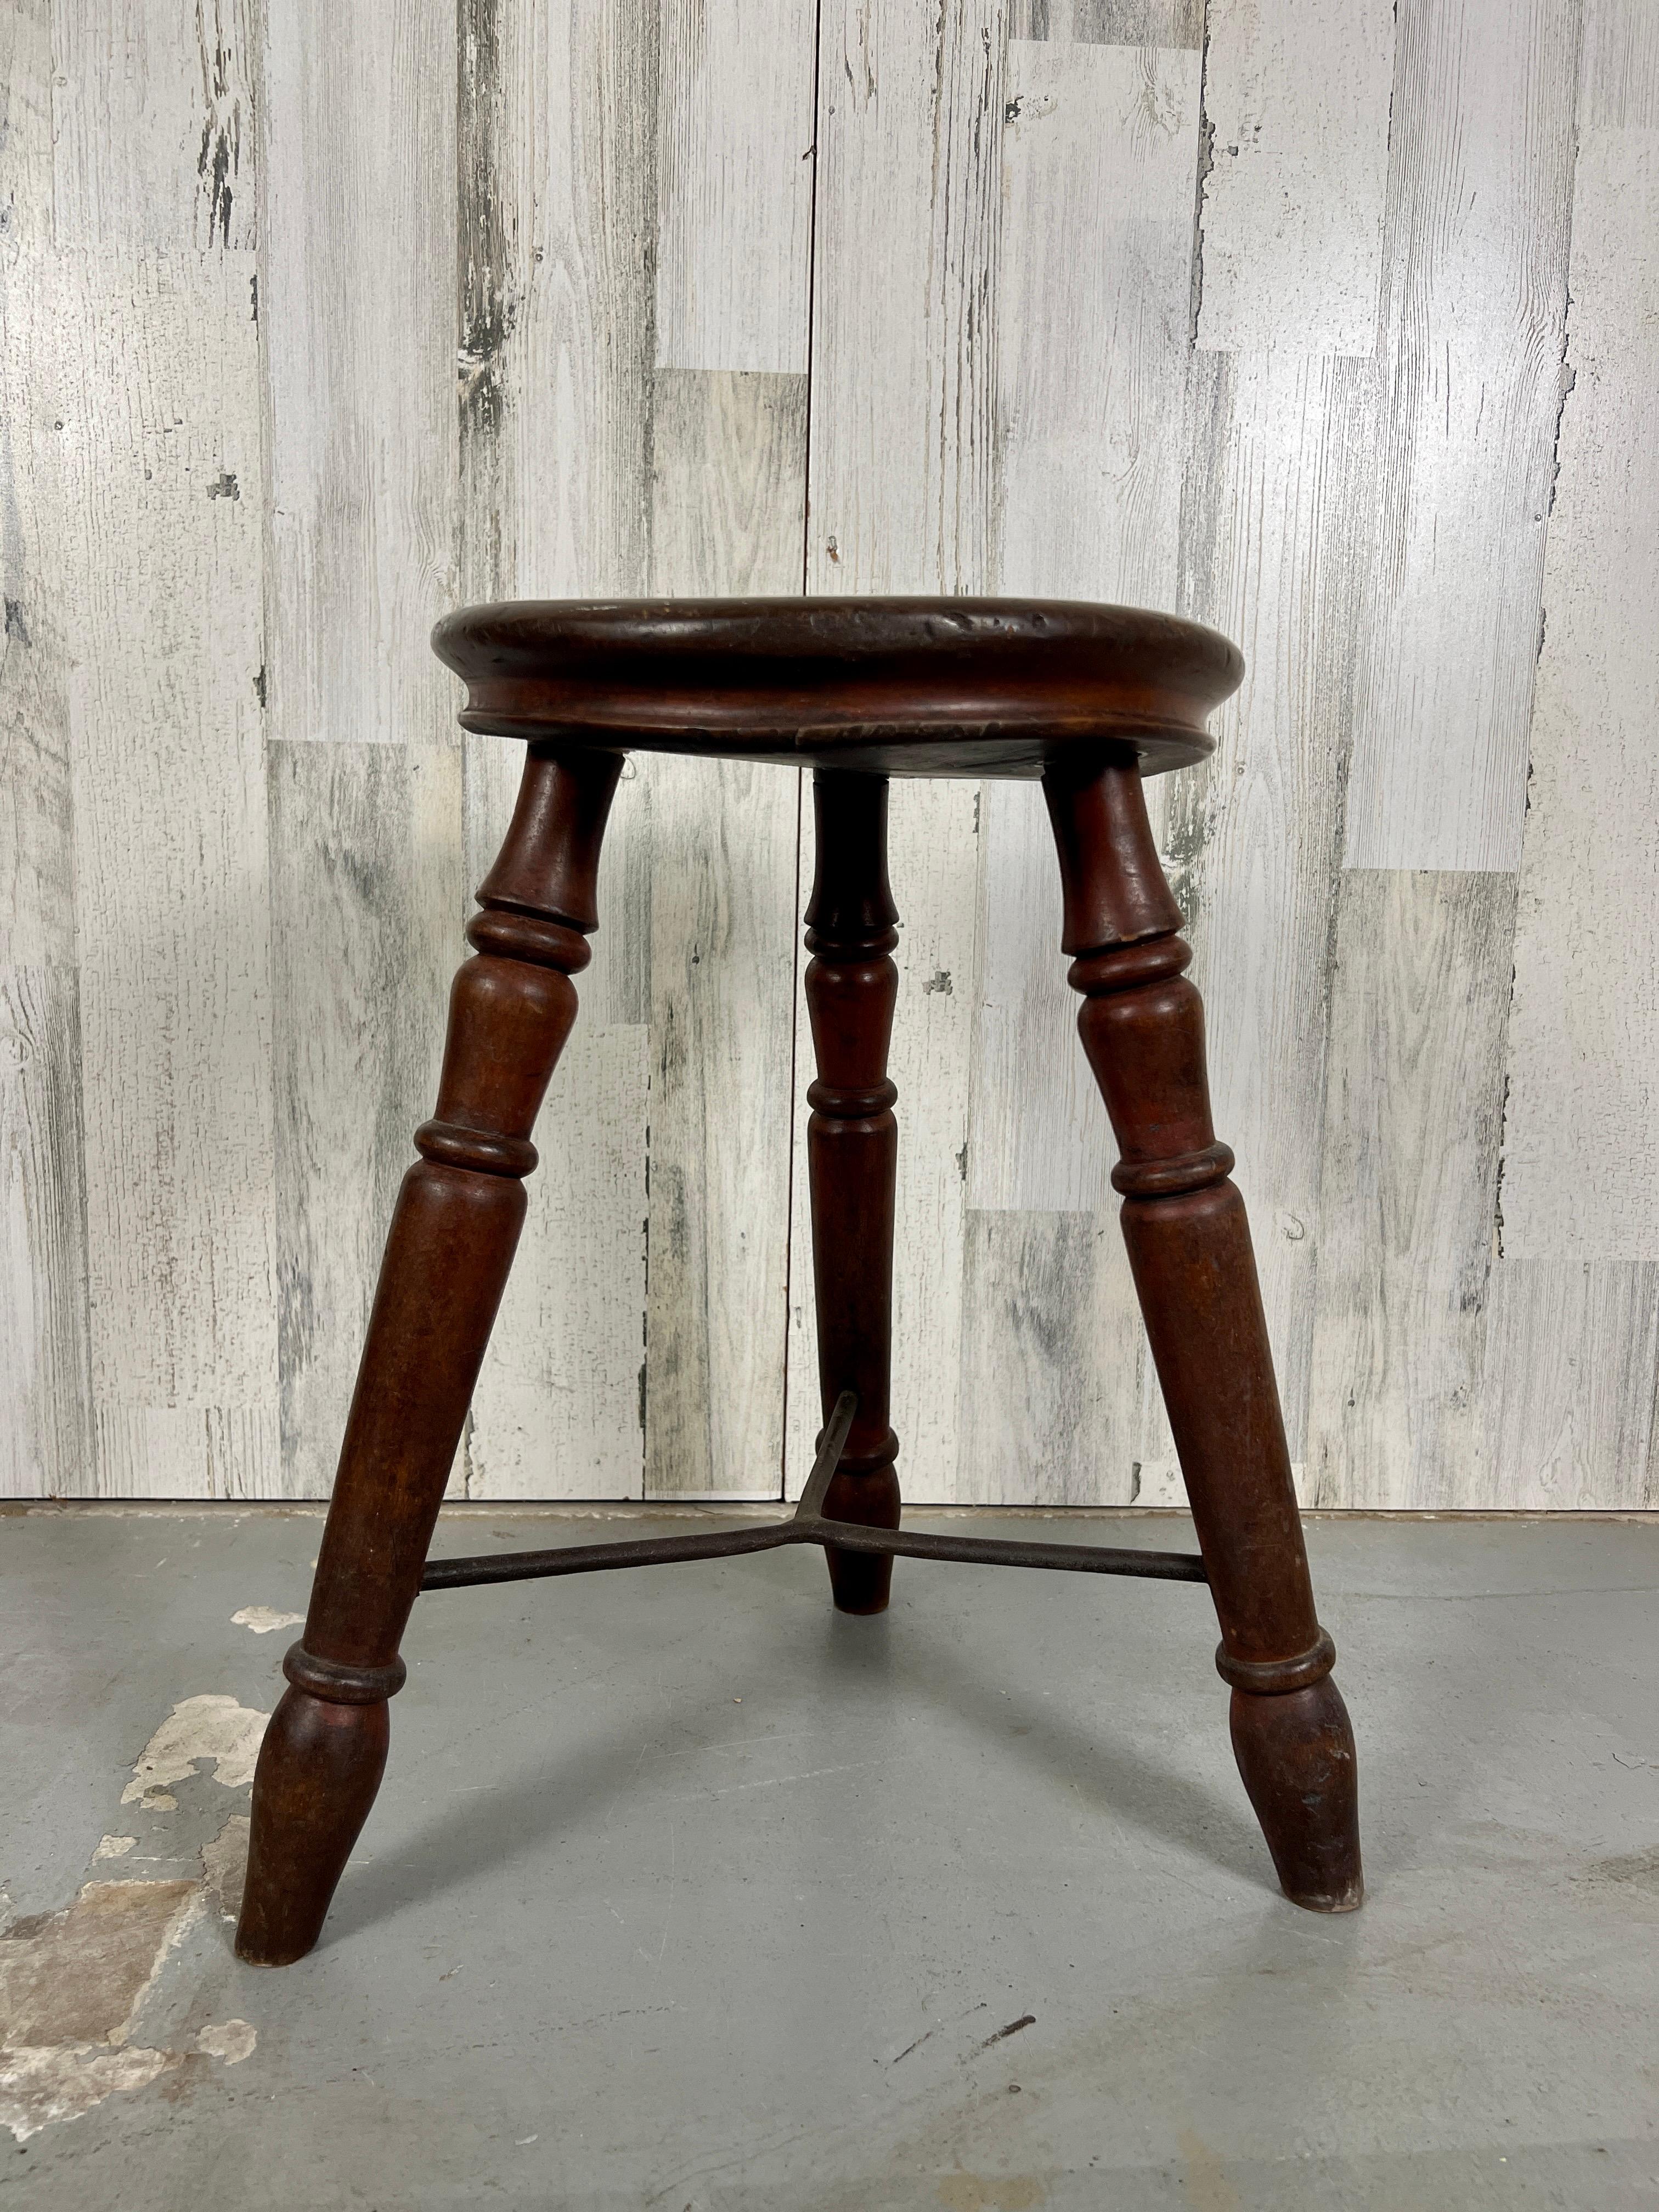 Handcrafted solid elm tripod stool with iron stretcher from an English pub.